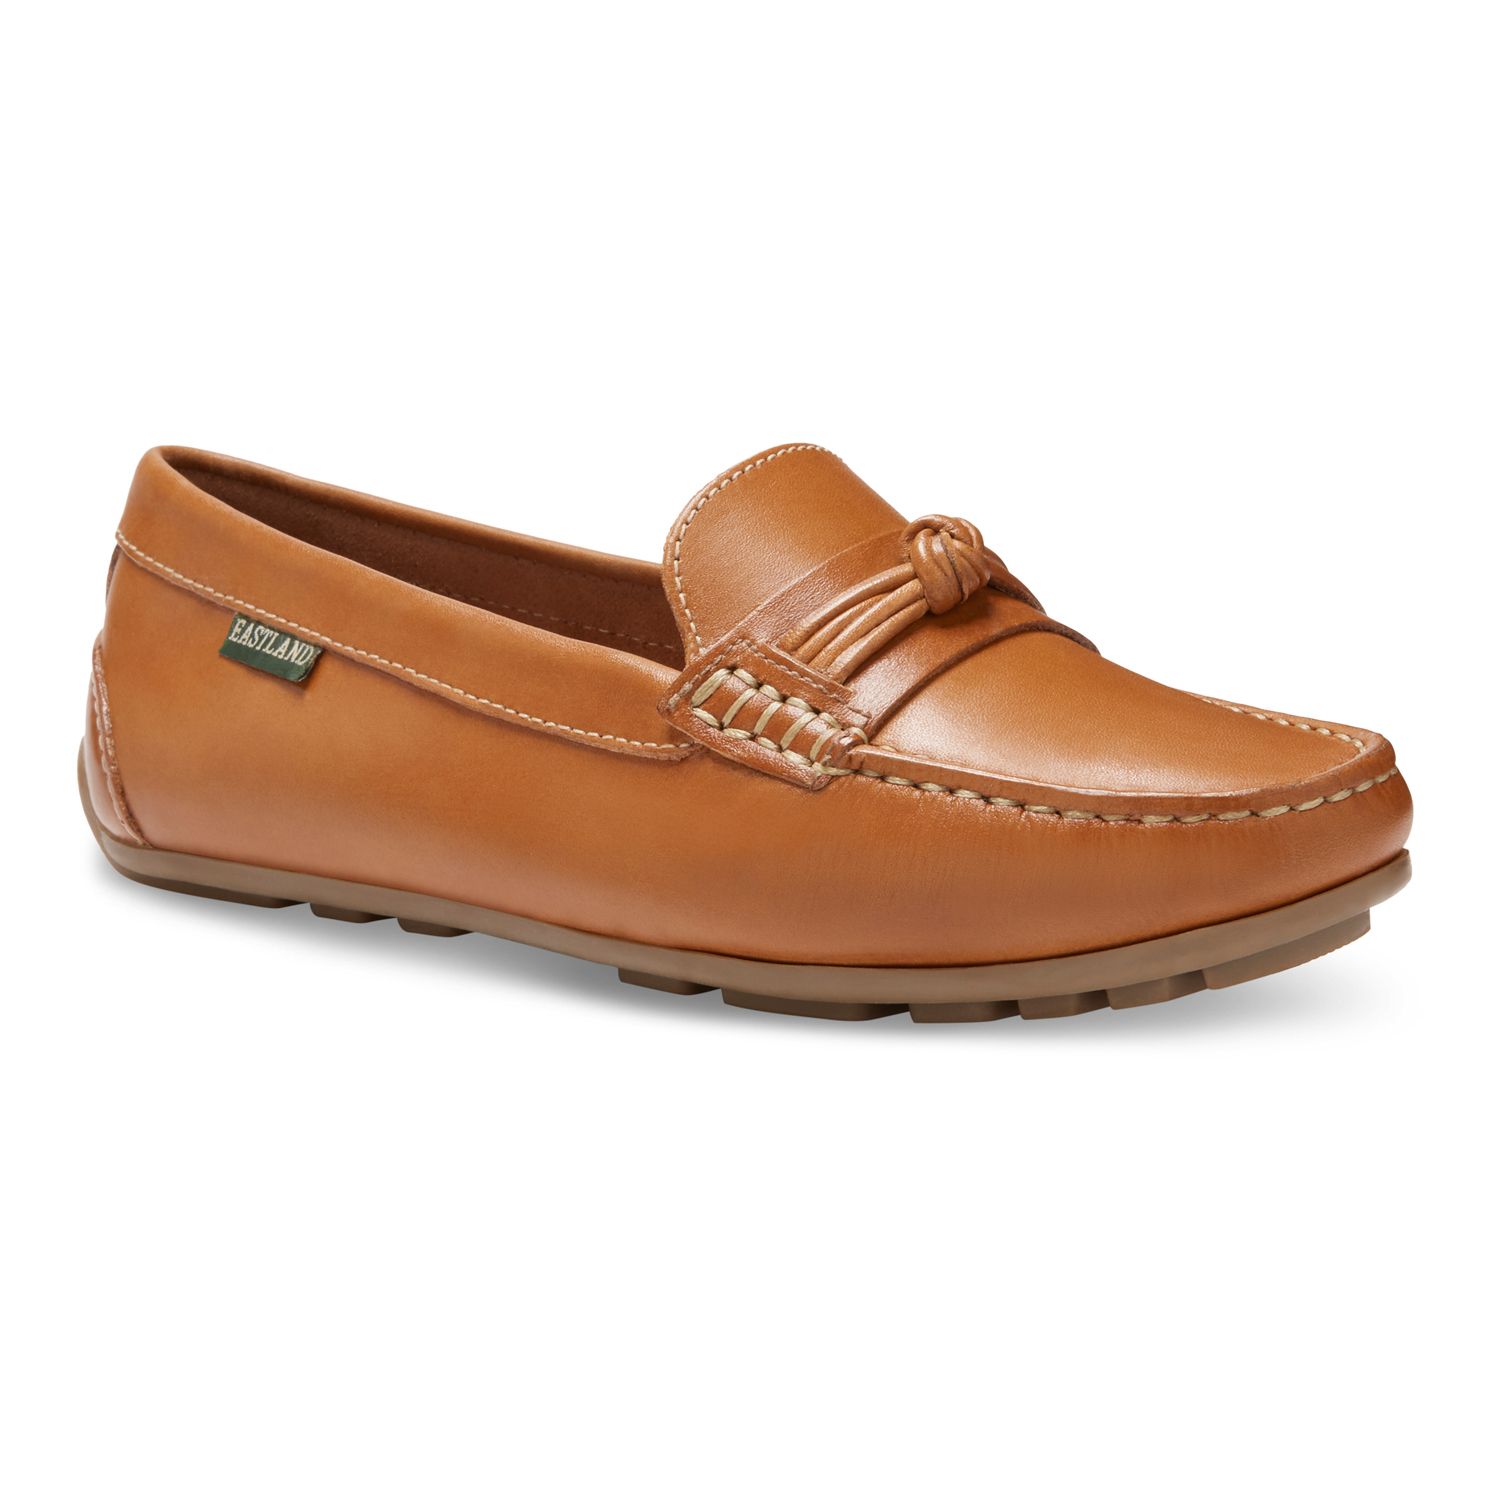 Image for Eastland Danica Women's Leather Loafers at Kohl's.